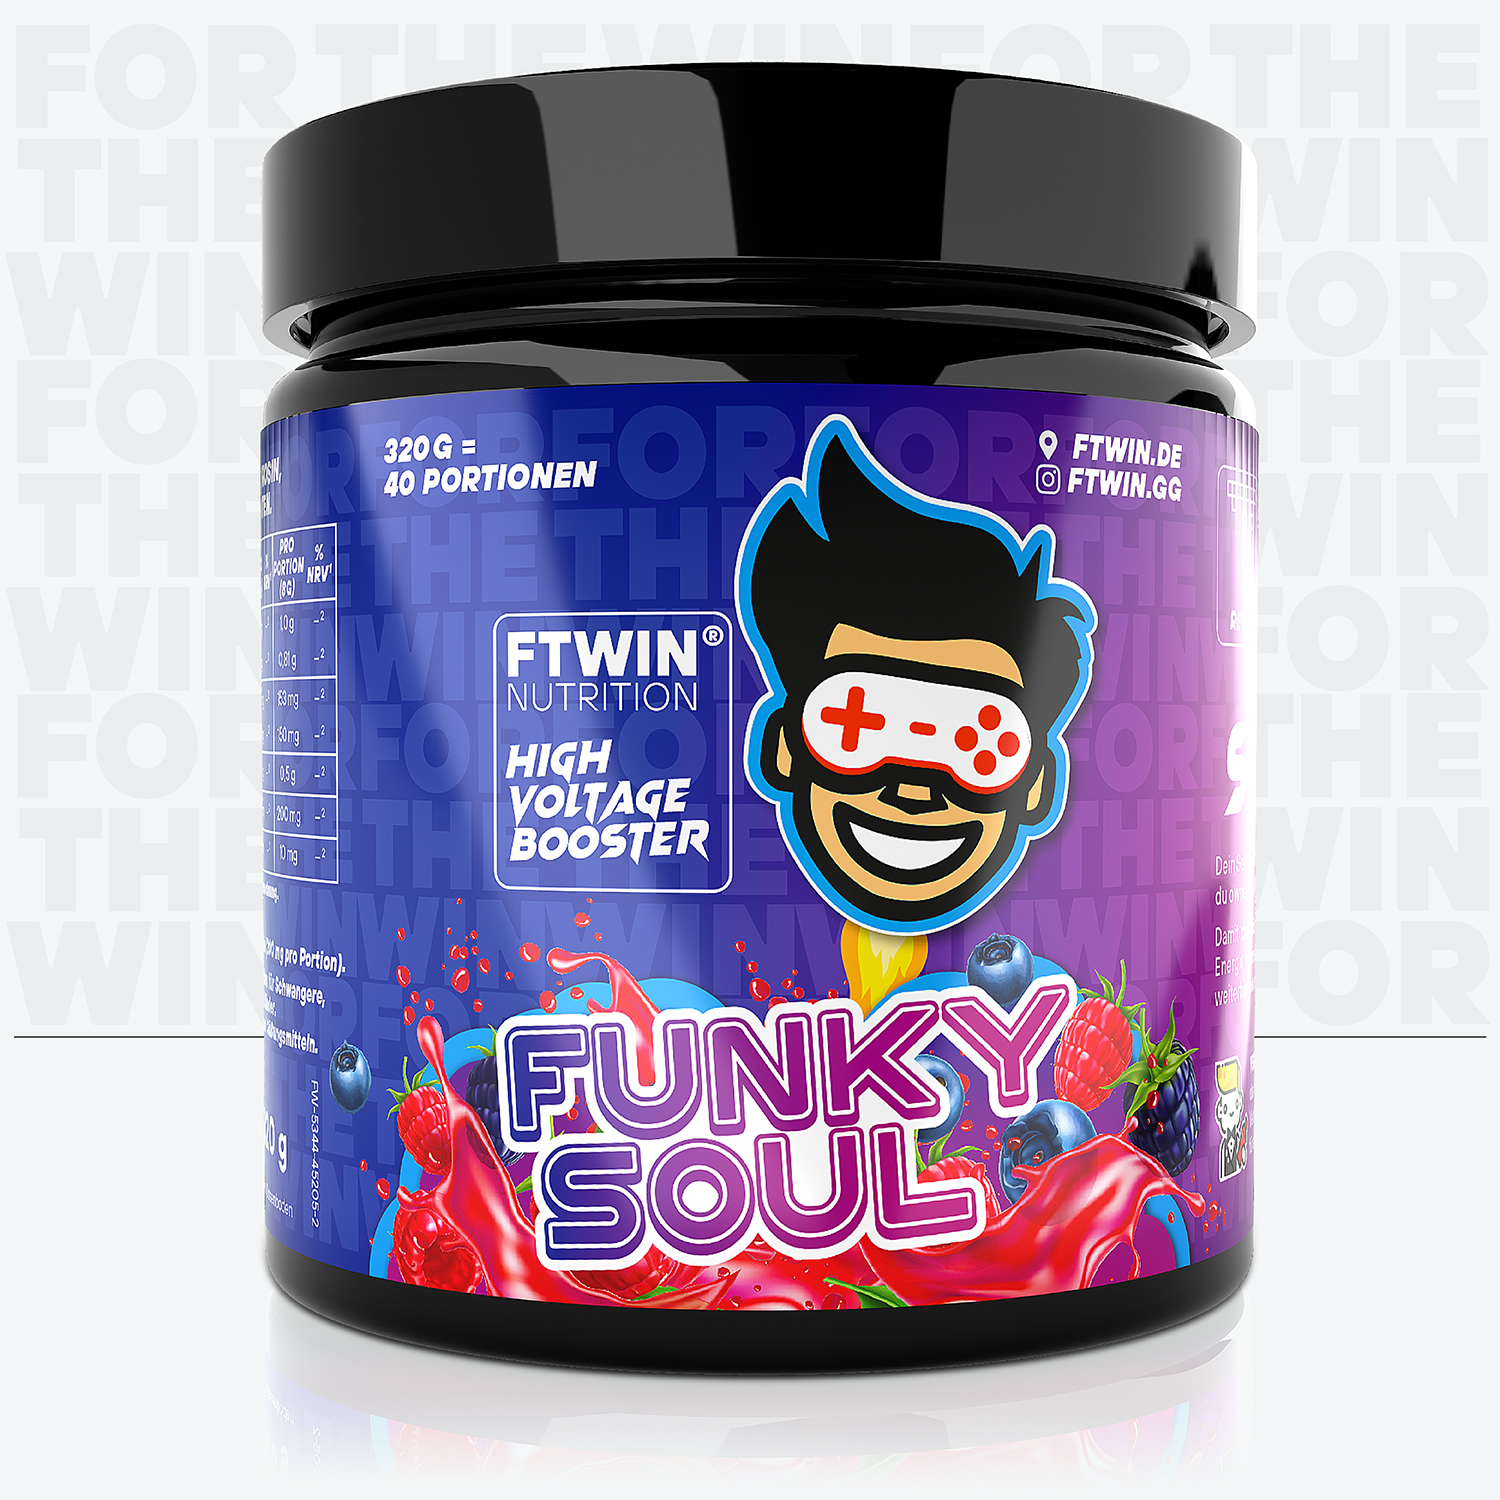 FTWIN High Voltage Gaming Booster – Funky Soul Flavour